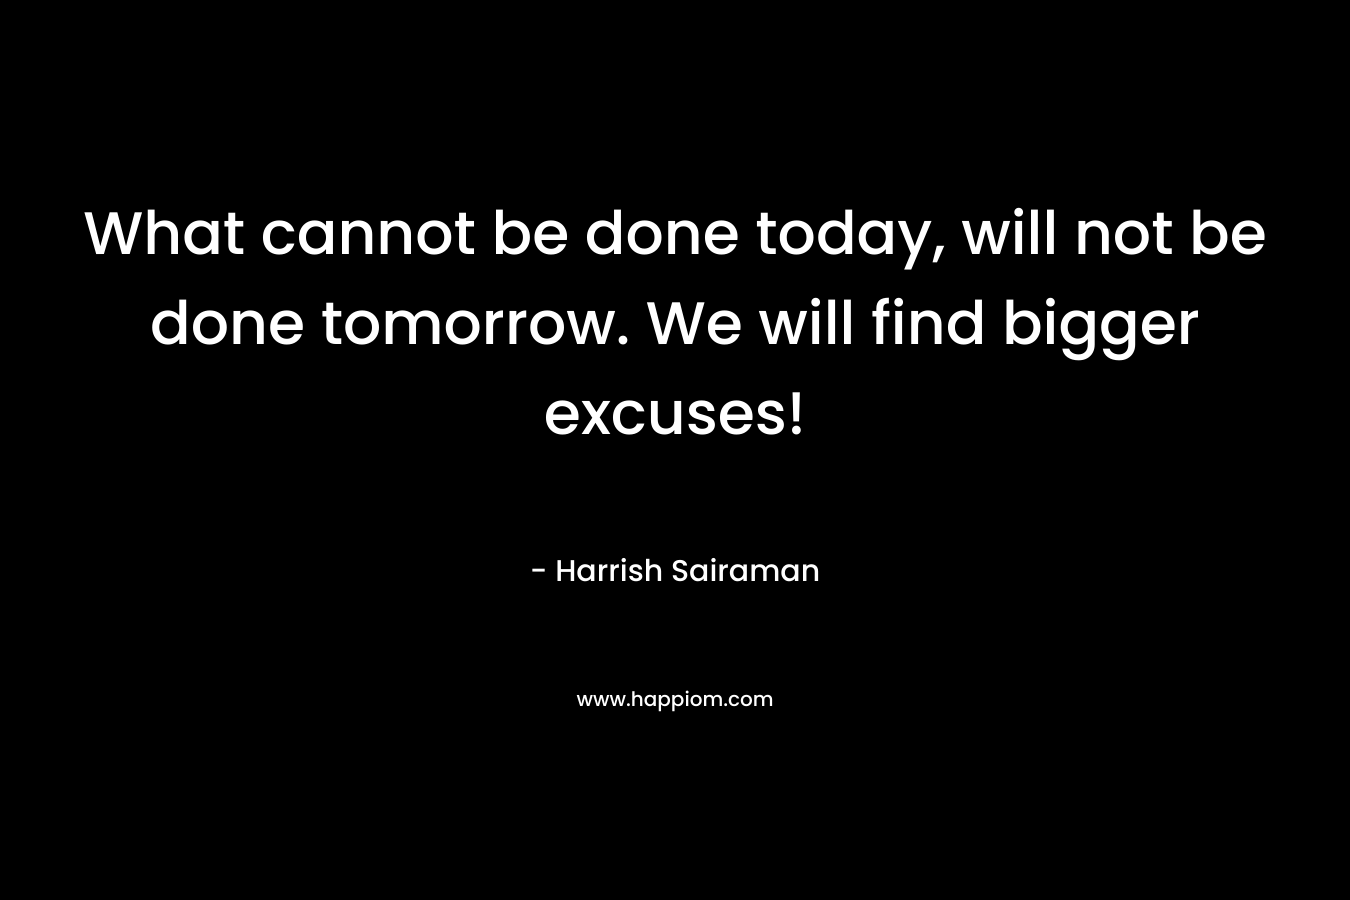 What cannot be done today, will not be done tomorrow. We will find bigger excuses!